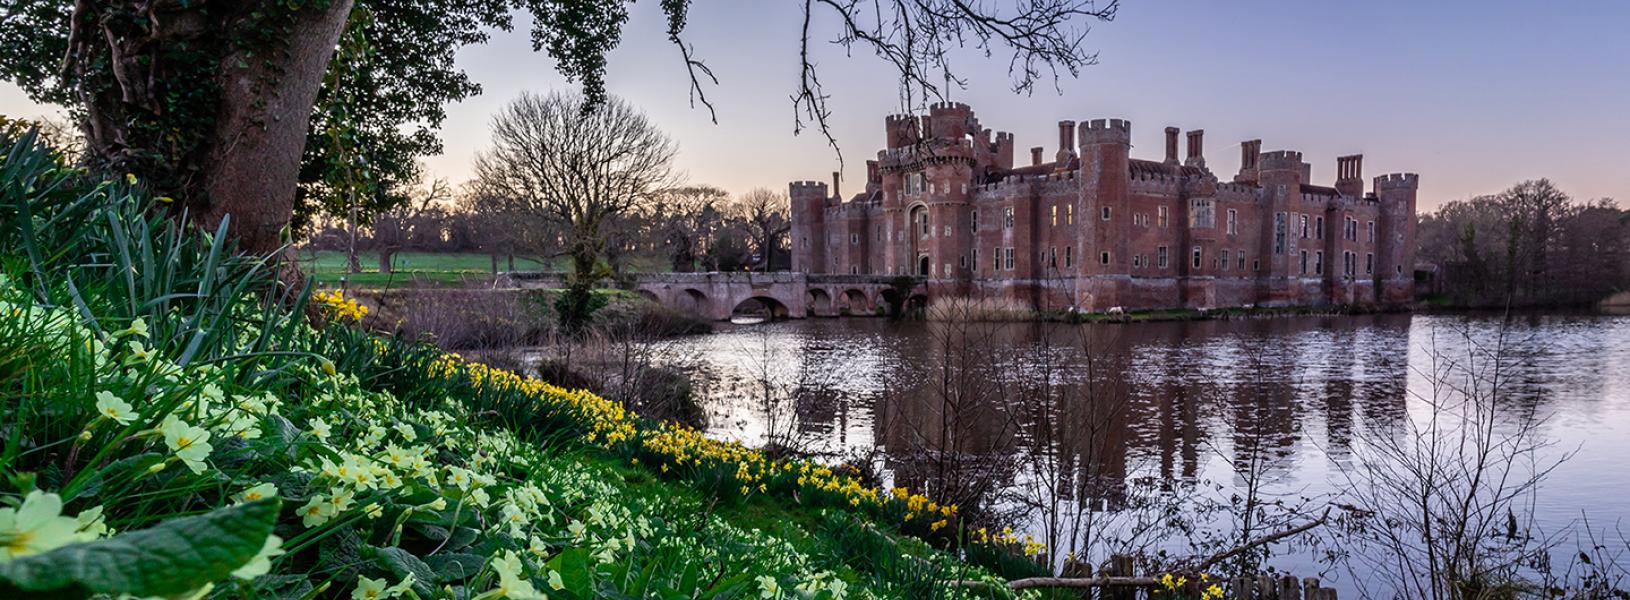 Herstmonceux Castle is the background and blooming daffodils in the foreground that is separated by a pond